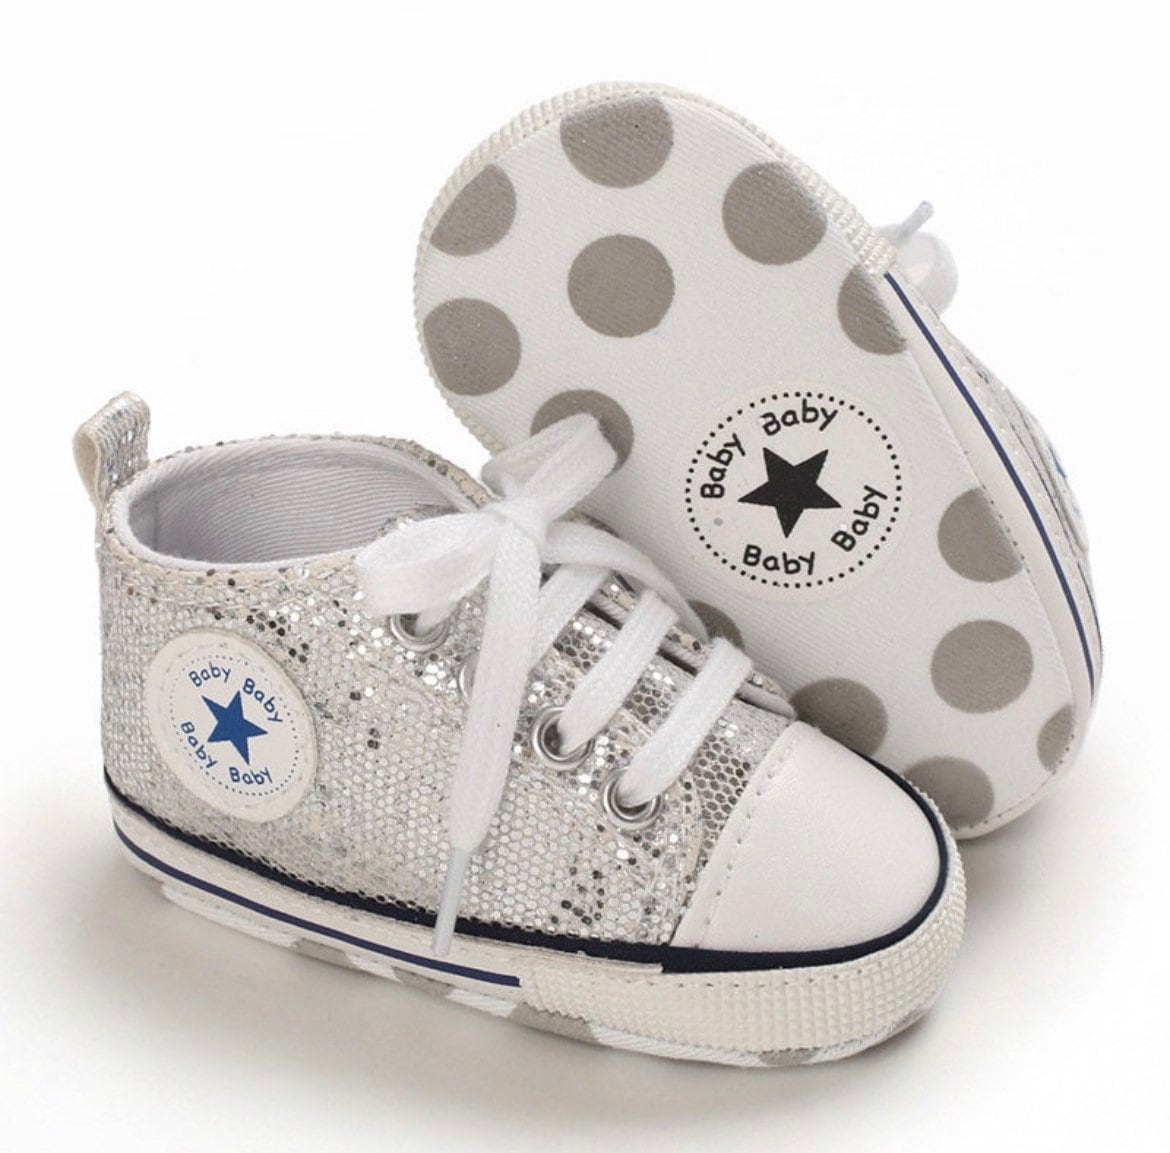 Baby Glitter Sneakers, Like Converse with Shimmer-
 Welcome! Thanks for looking in our shop and viewing these beautiful baby shoes.Your baby will look so adorableIn these smart casual shoes perfect for so many occas-Bijou Bubs